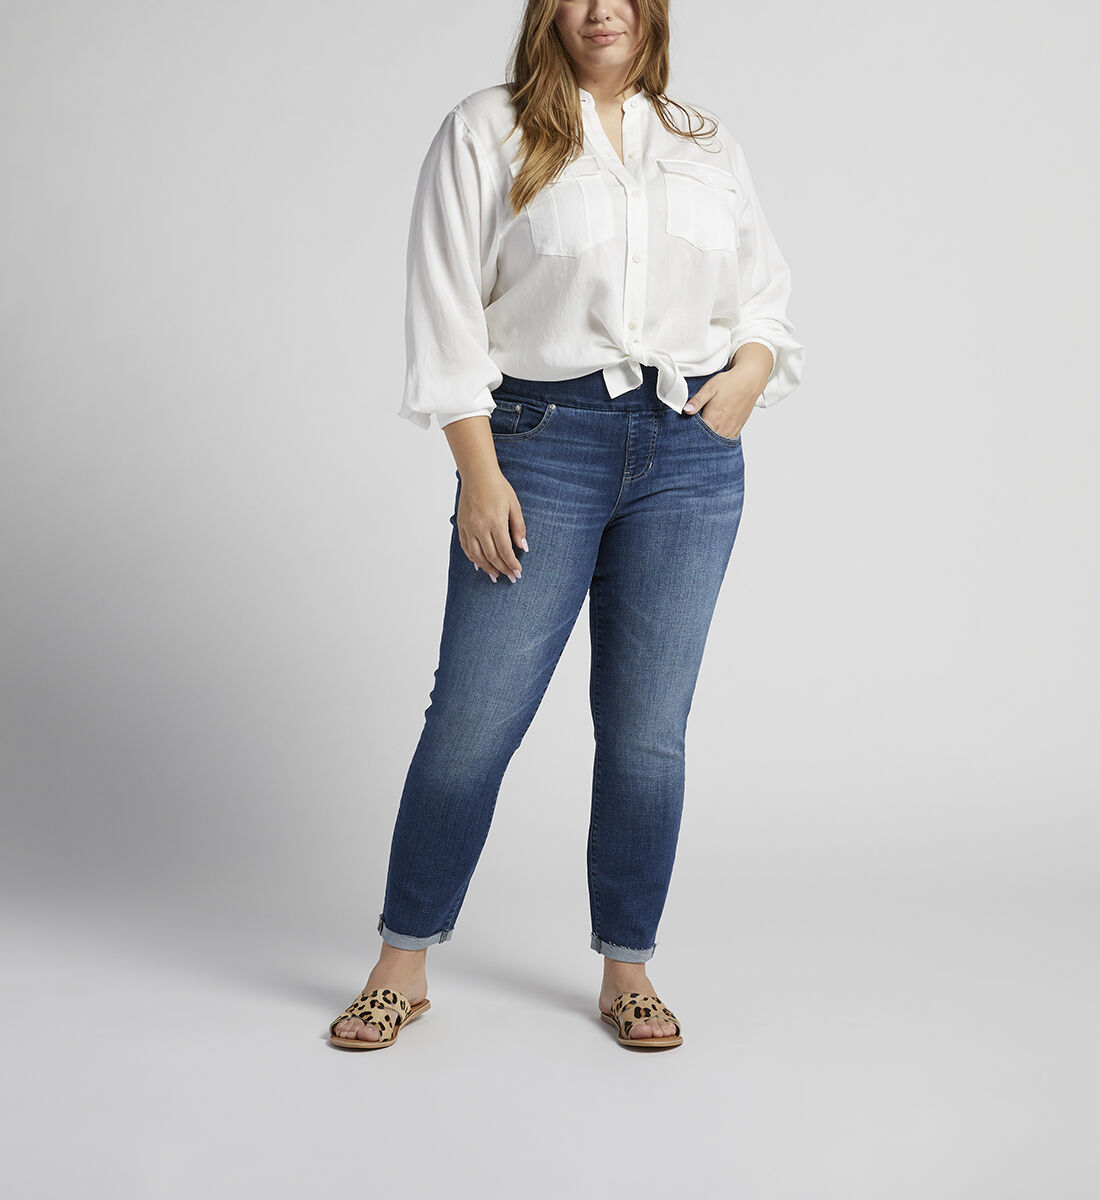 Amelia Mid Rise Slim Ankle Pull-On Jeans Plus Size Front